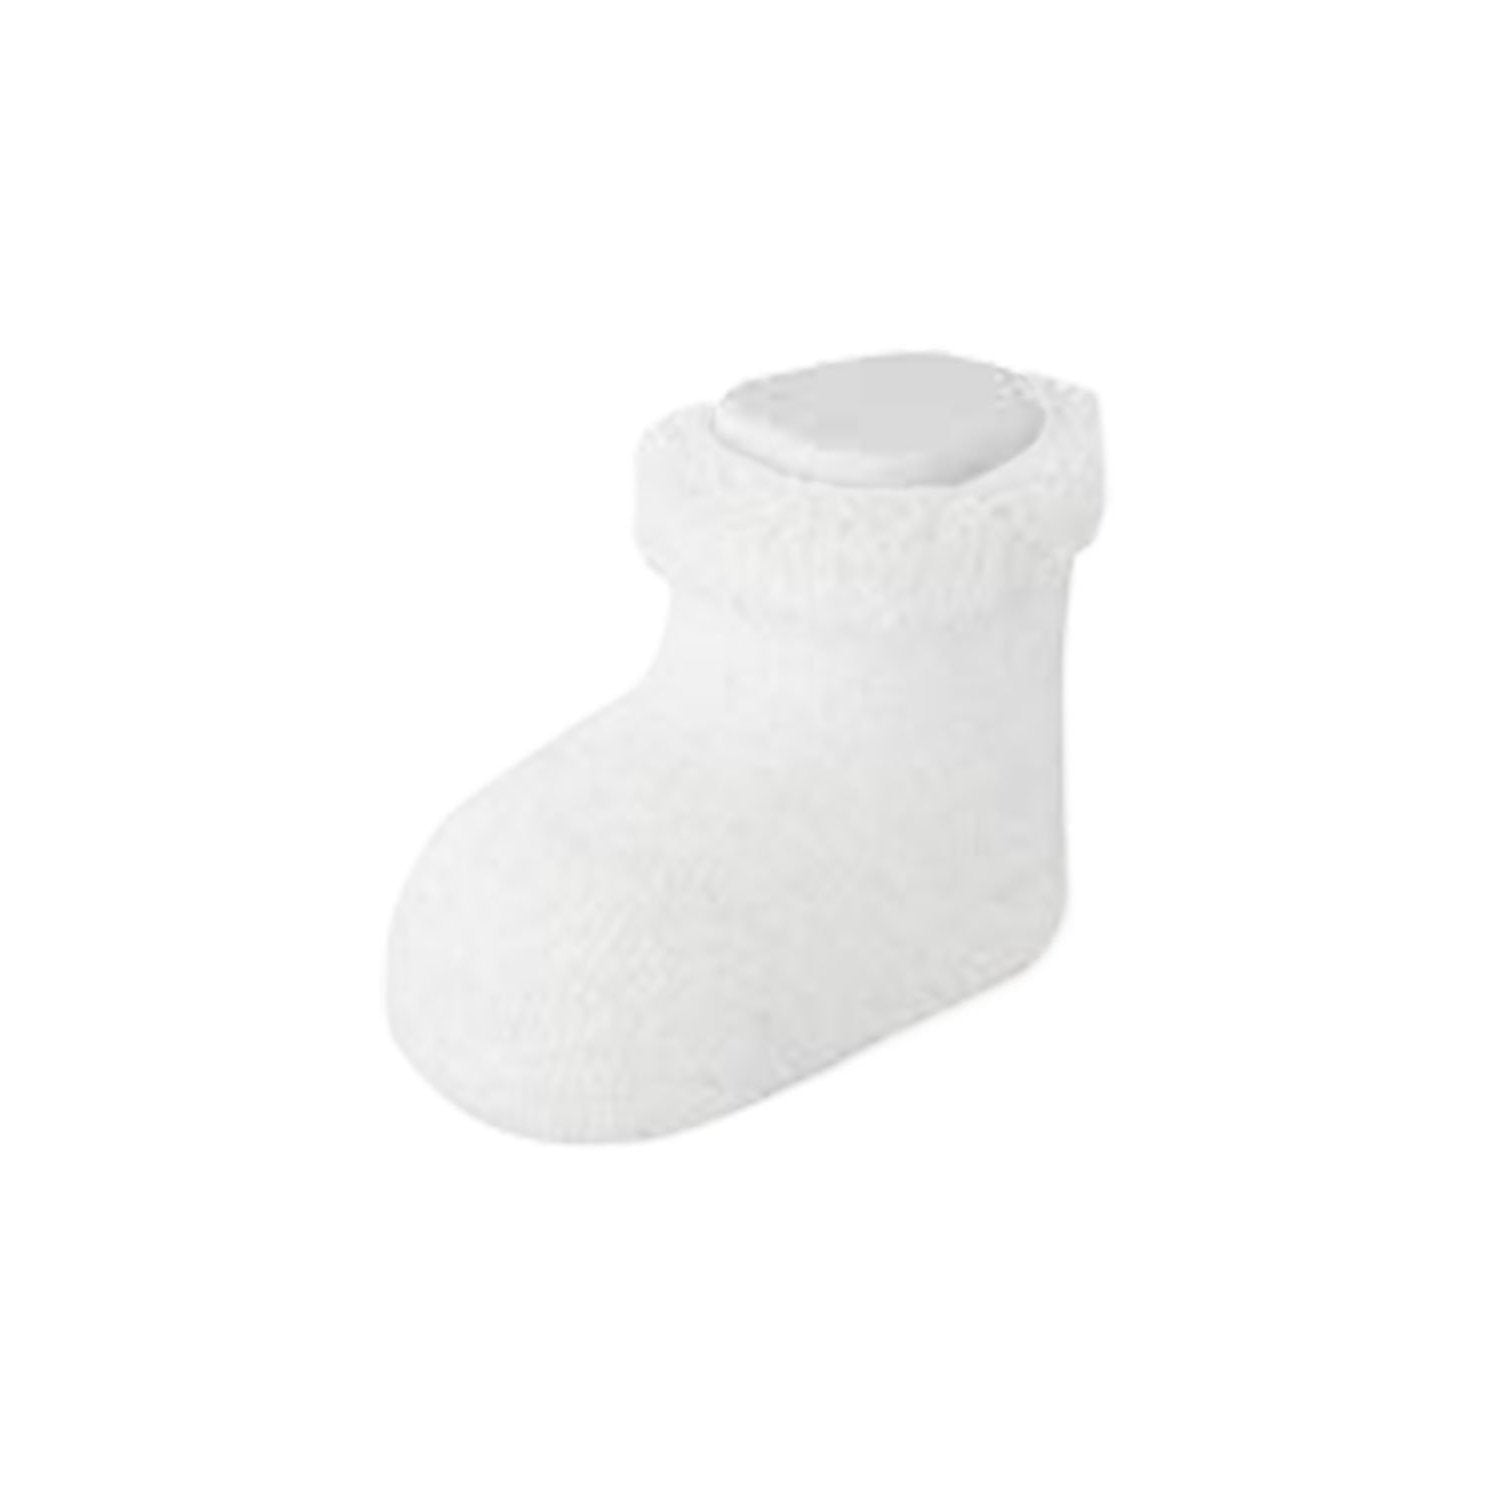 Carlomagno Baby Booties White-CARLOMAGNO-Little Giant Kidz